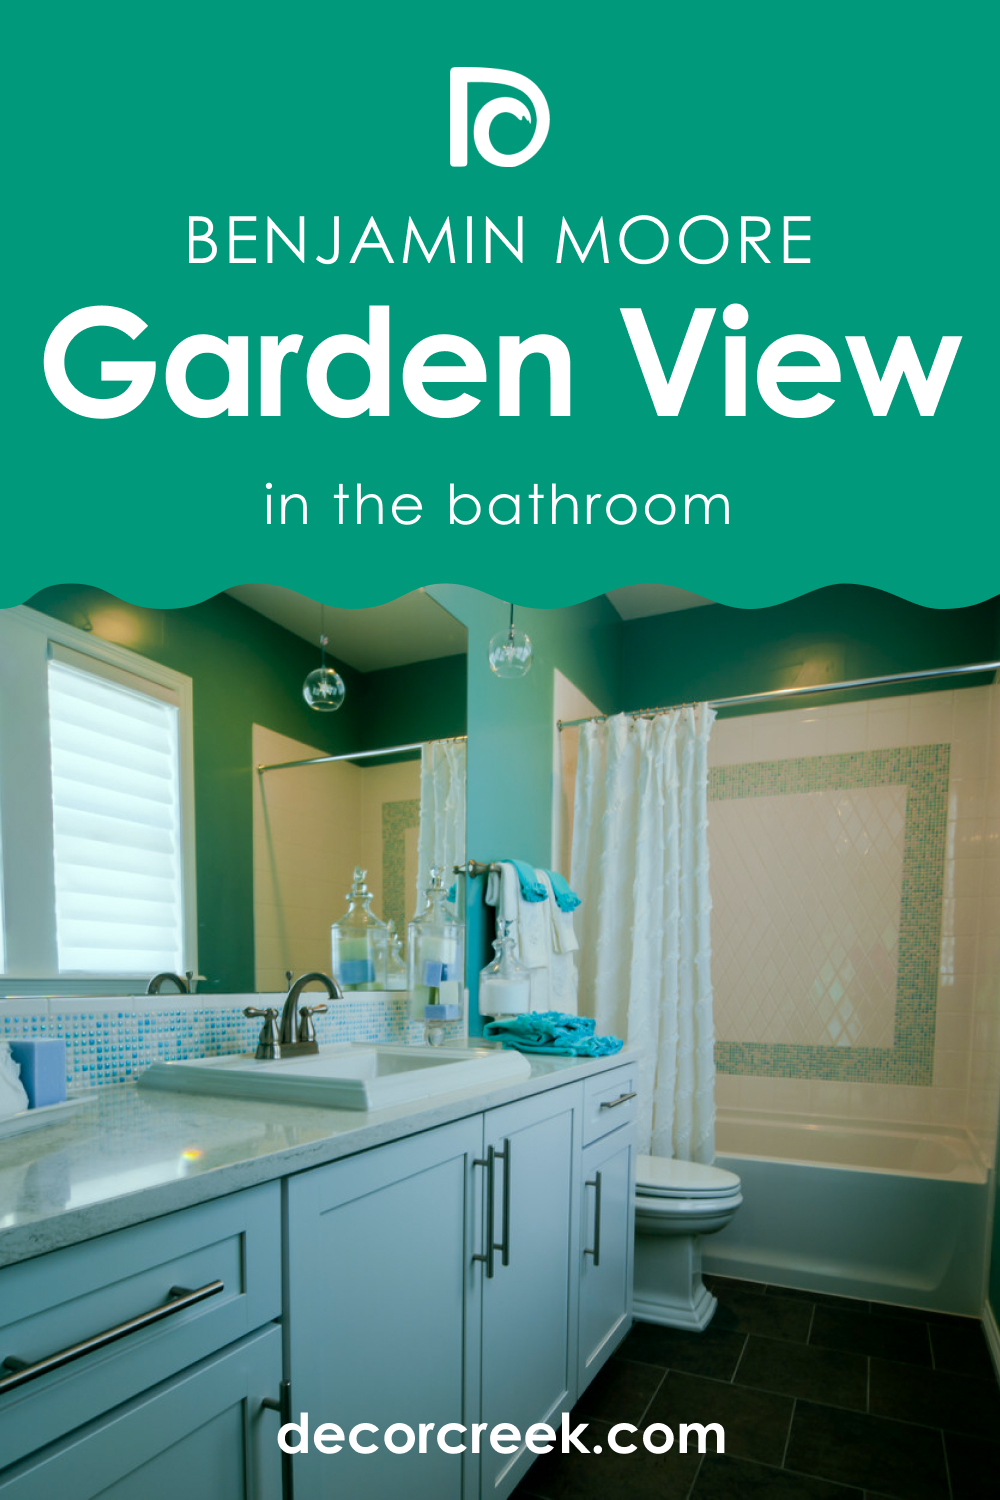 How to Use Garden View 616 in the Bathroom?